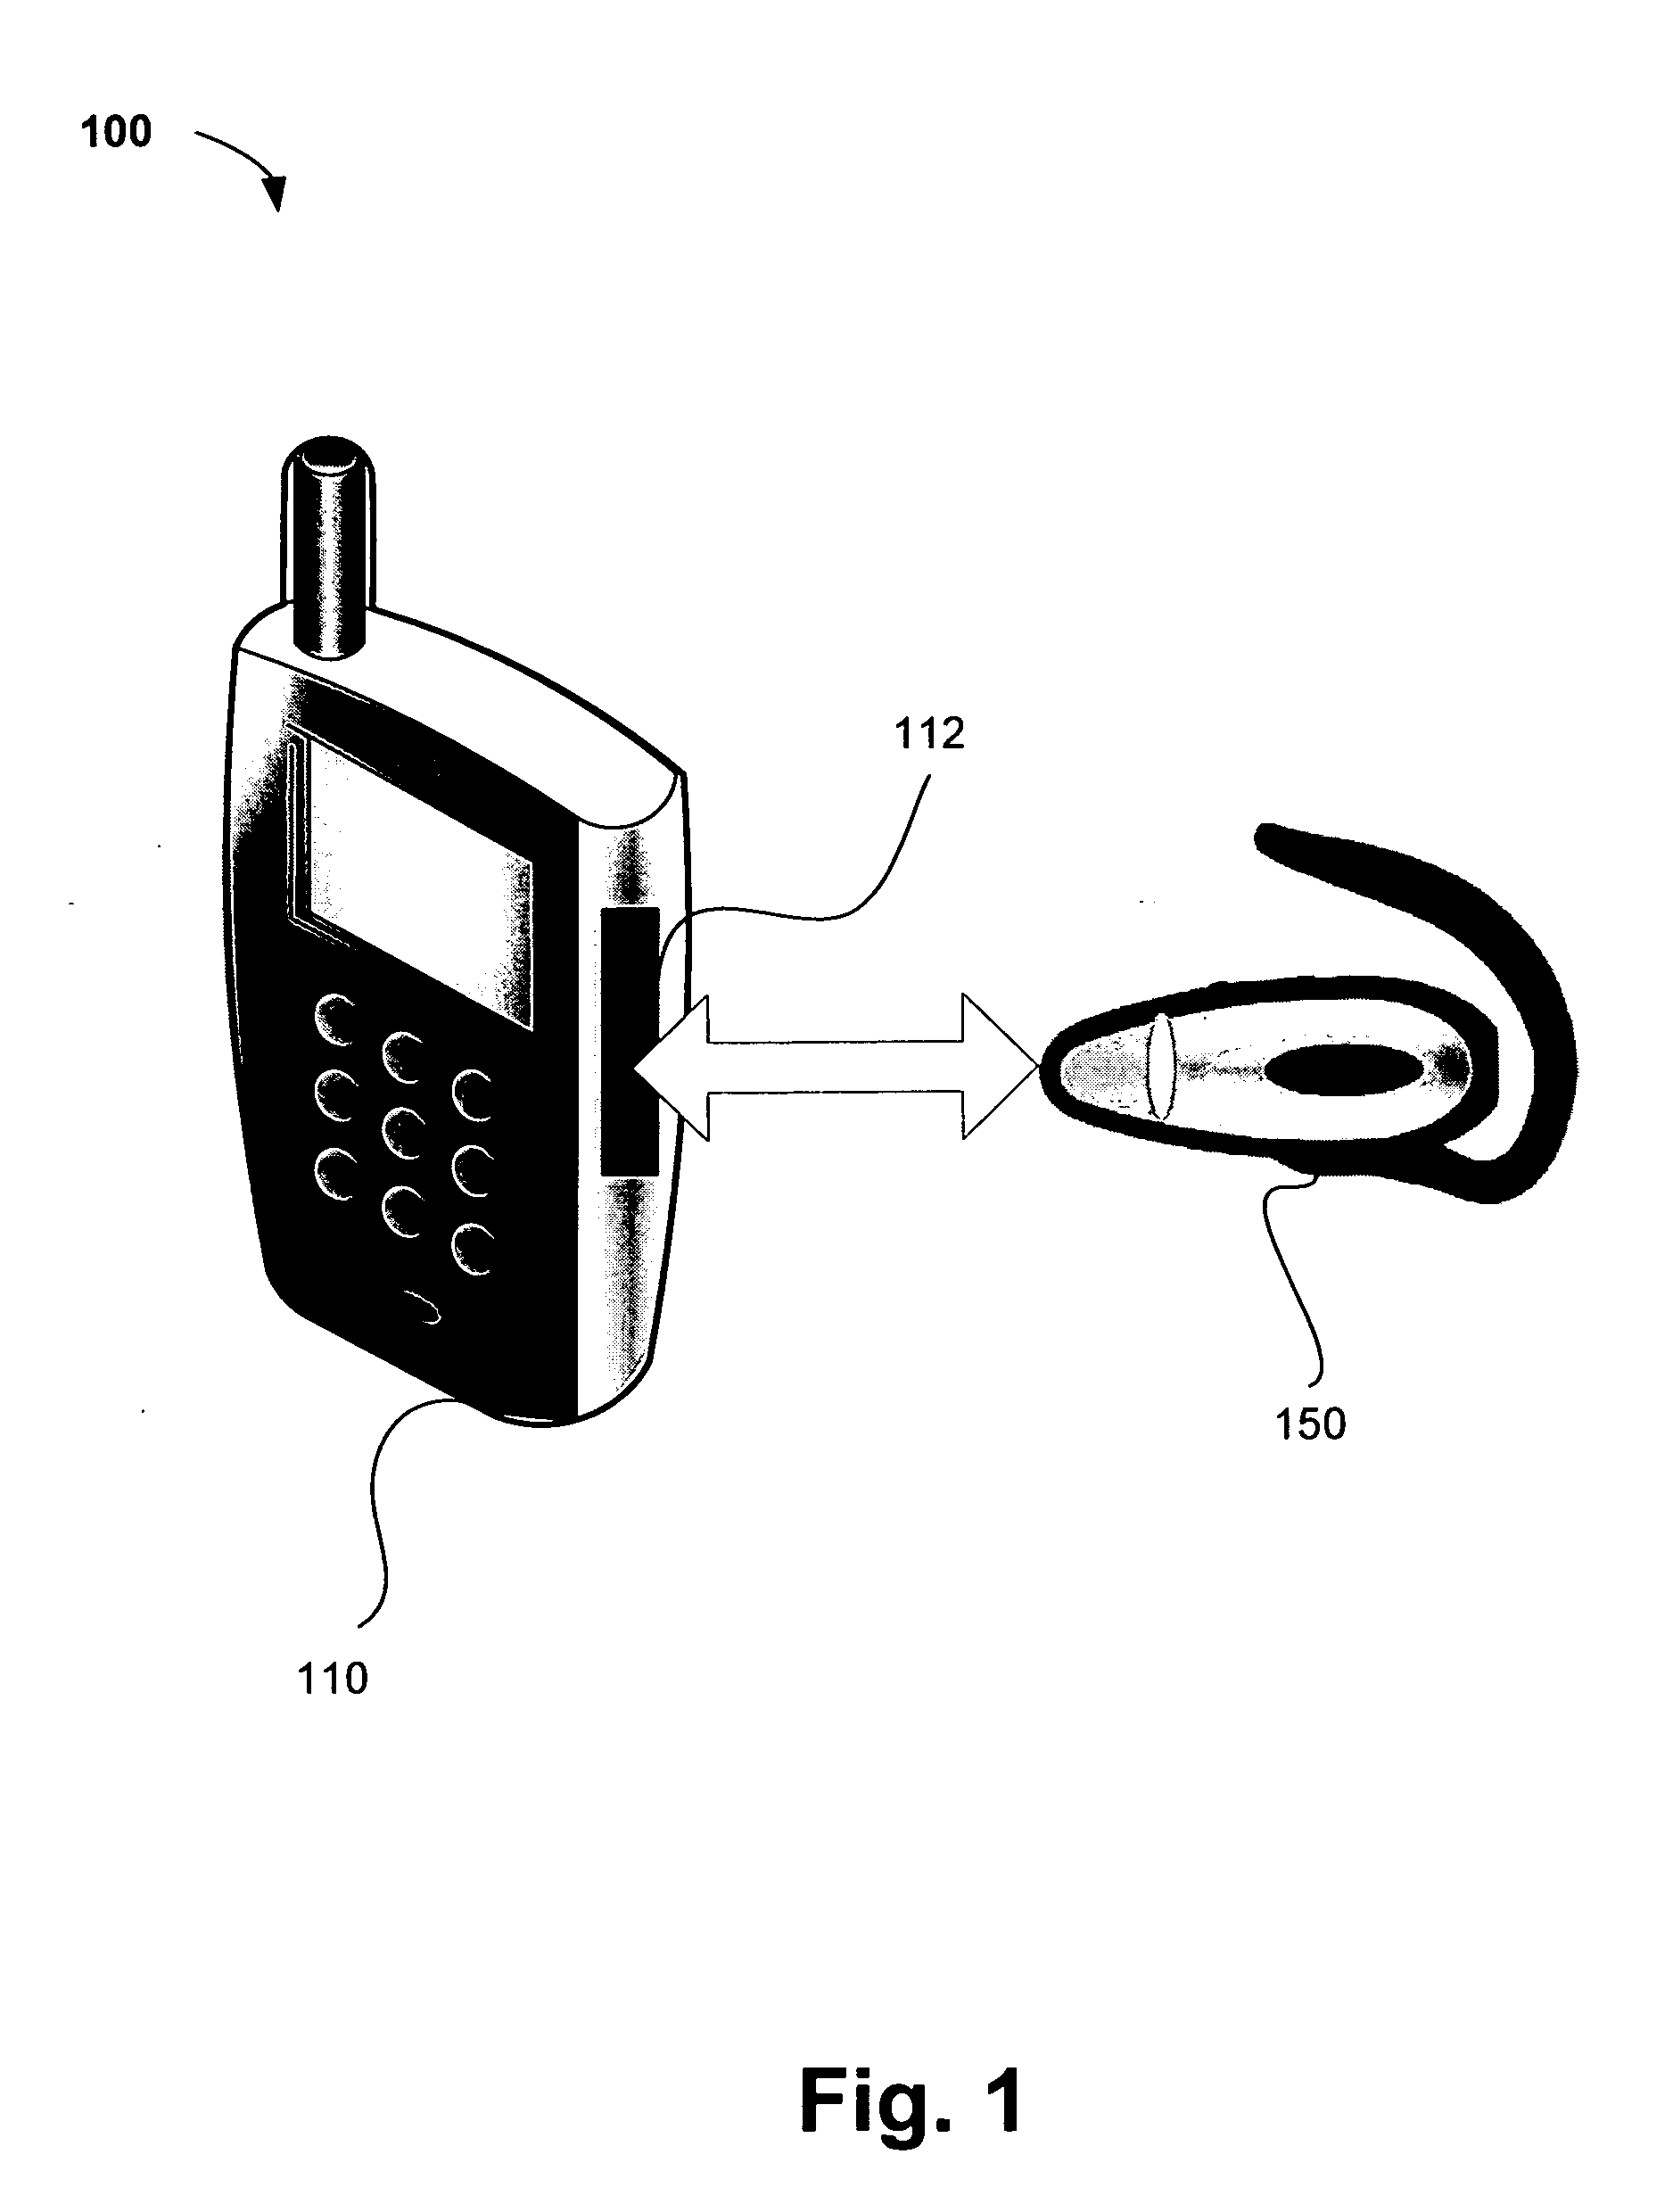 Portable communication device with detachable wireless headset